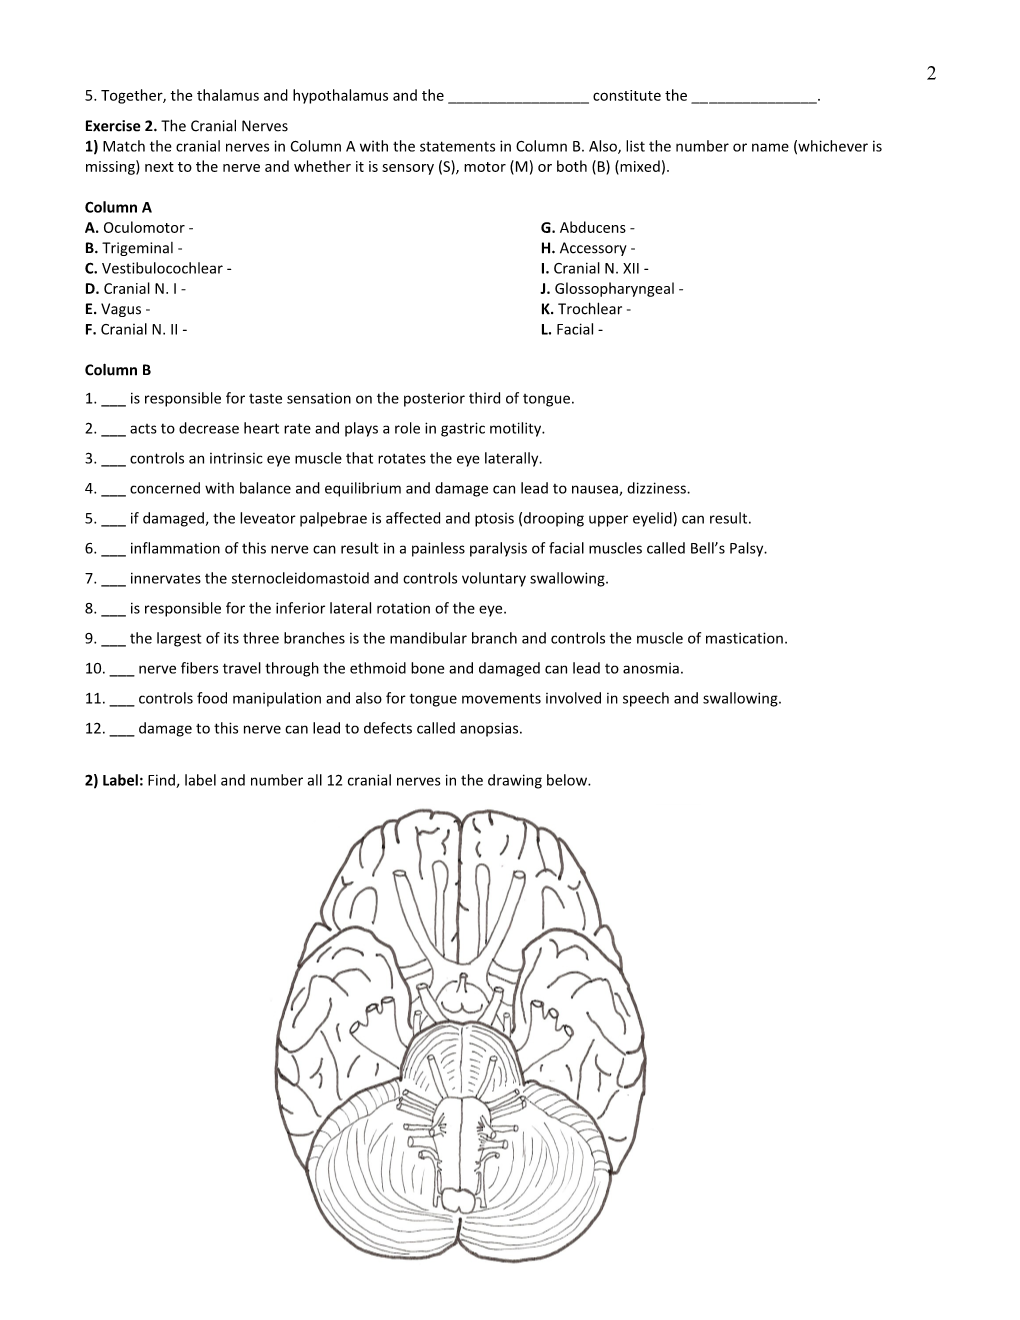 The Nervous System: Brain and Cranial Nerves